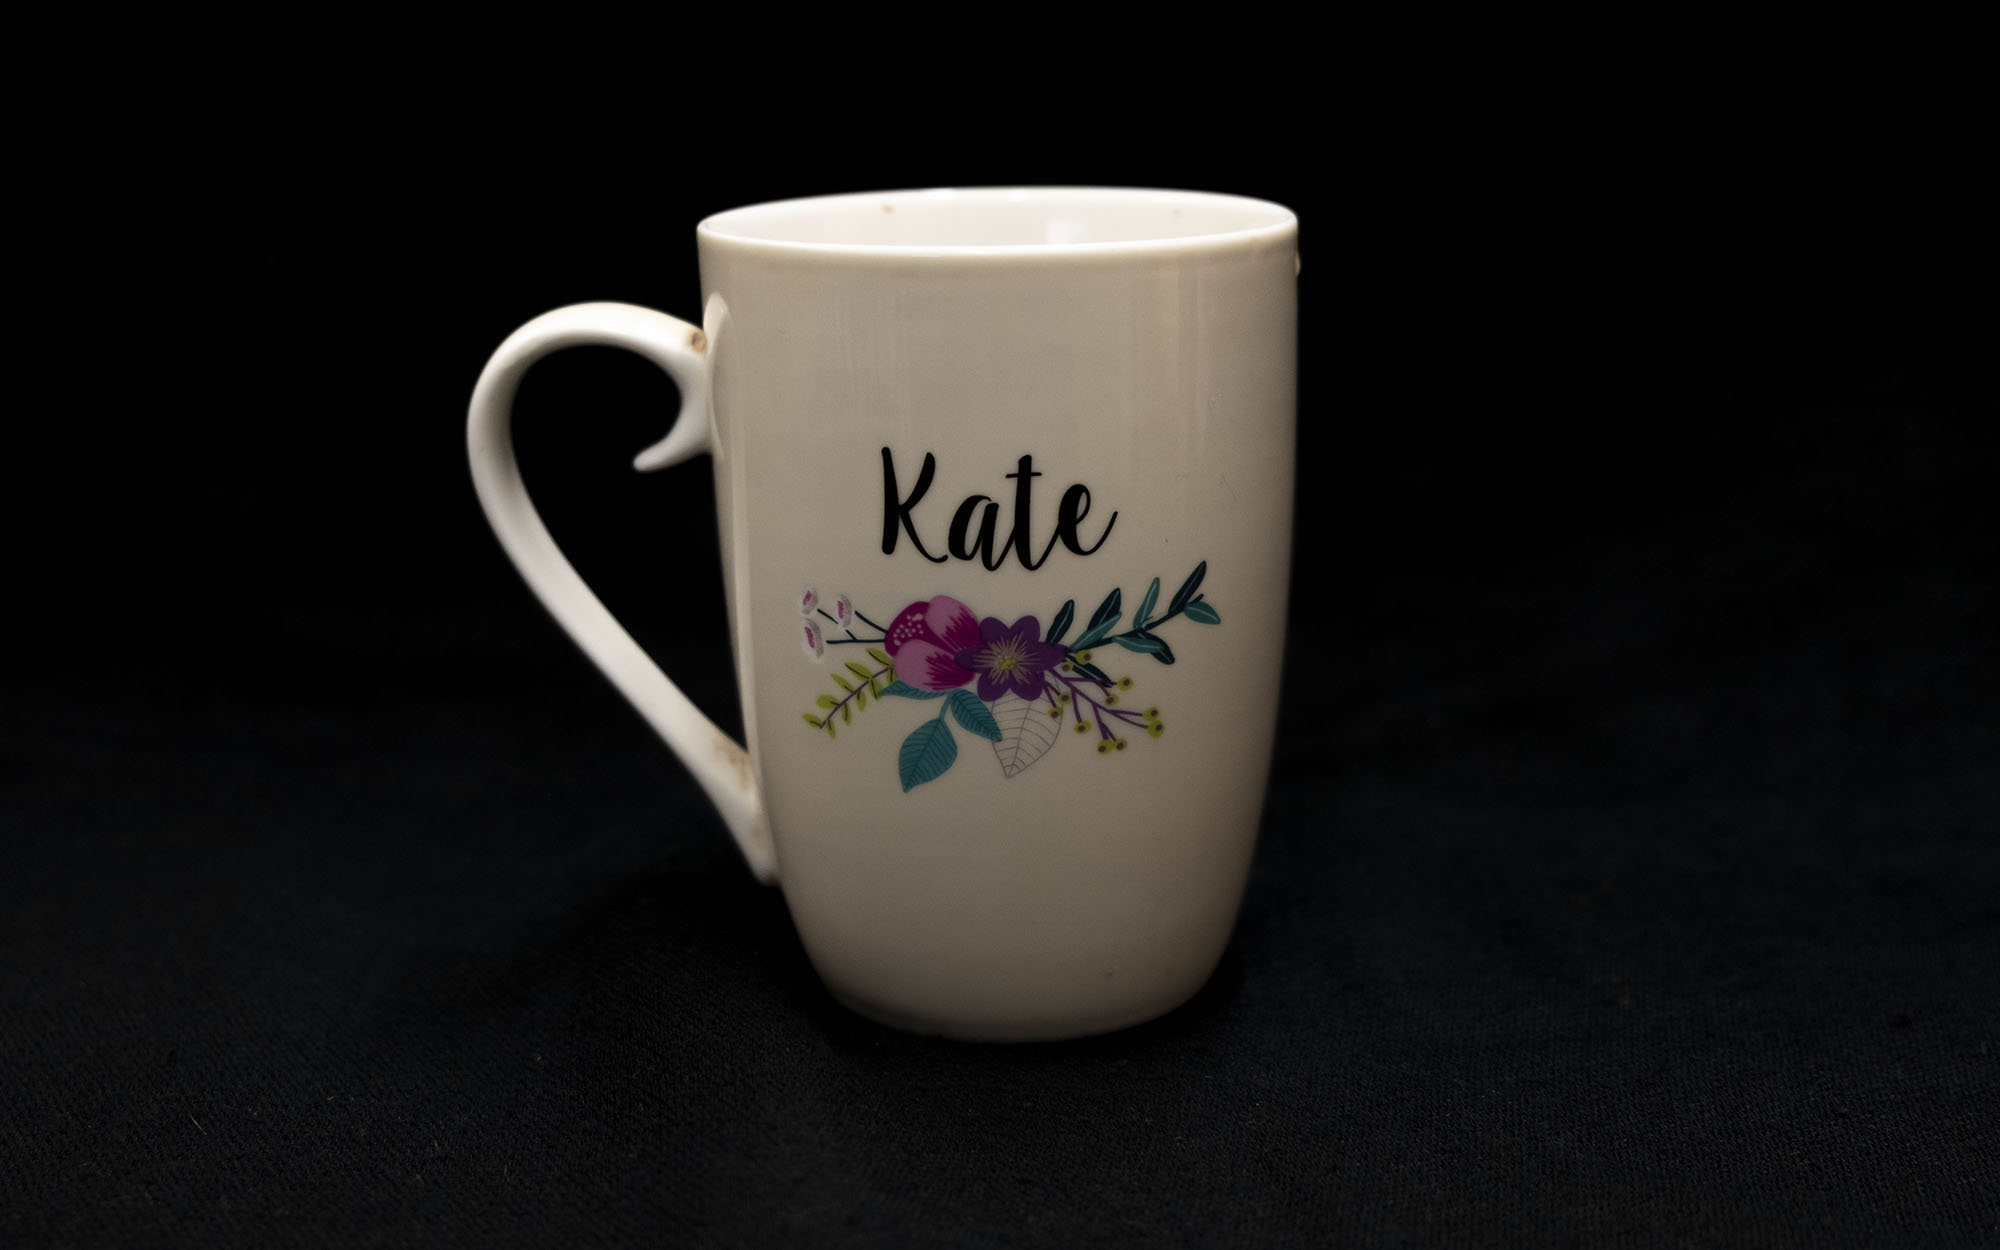 Large cup that says "Kate" and has a picture of flowers on it